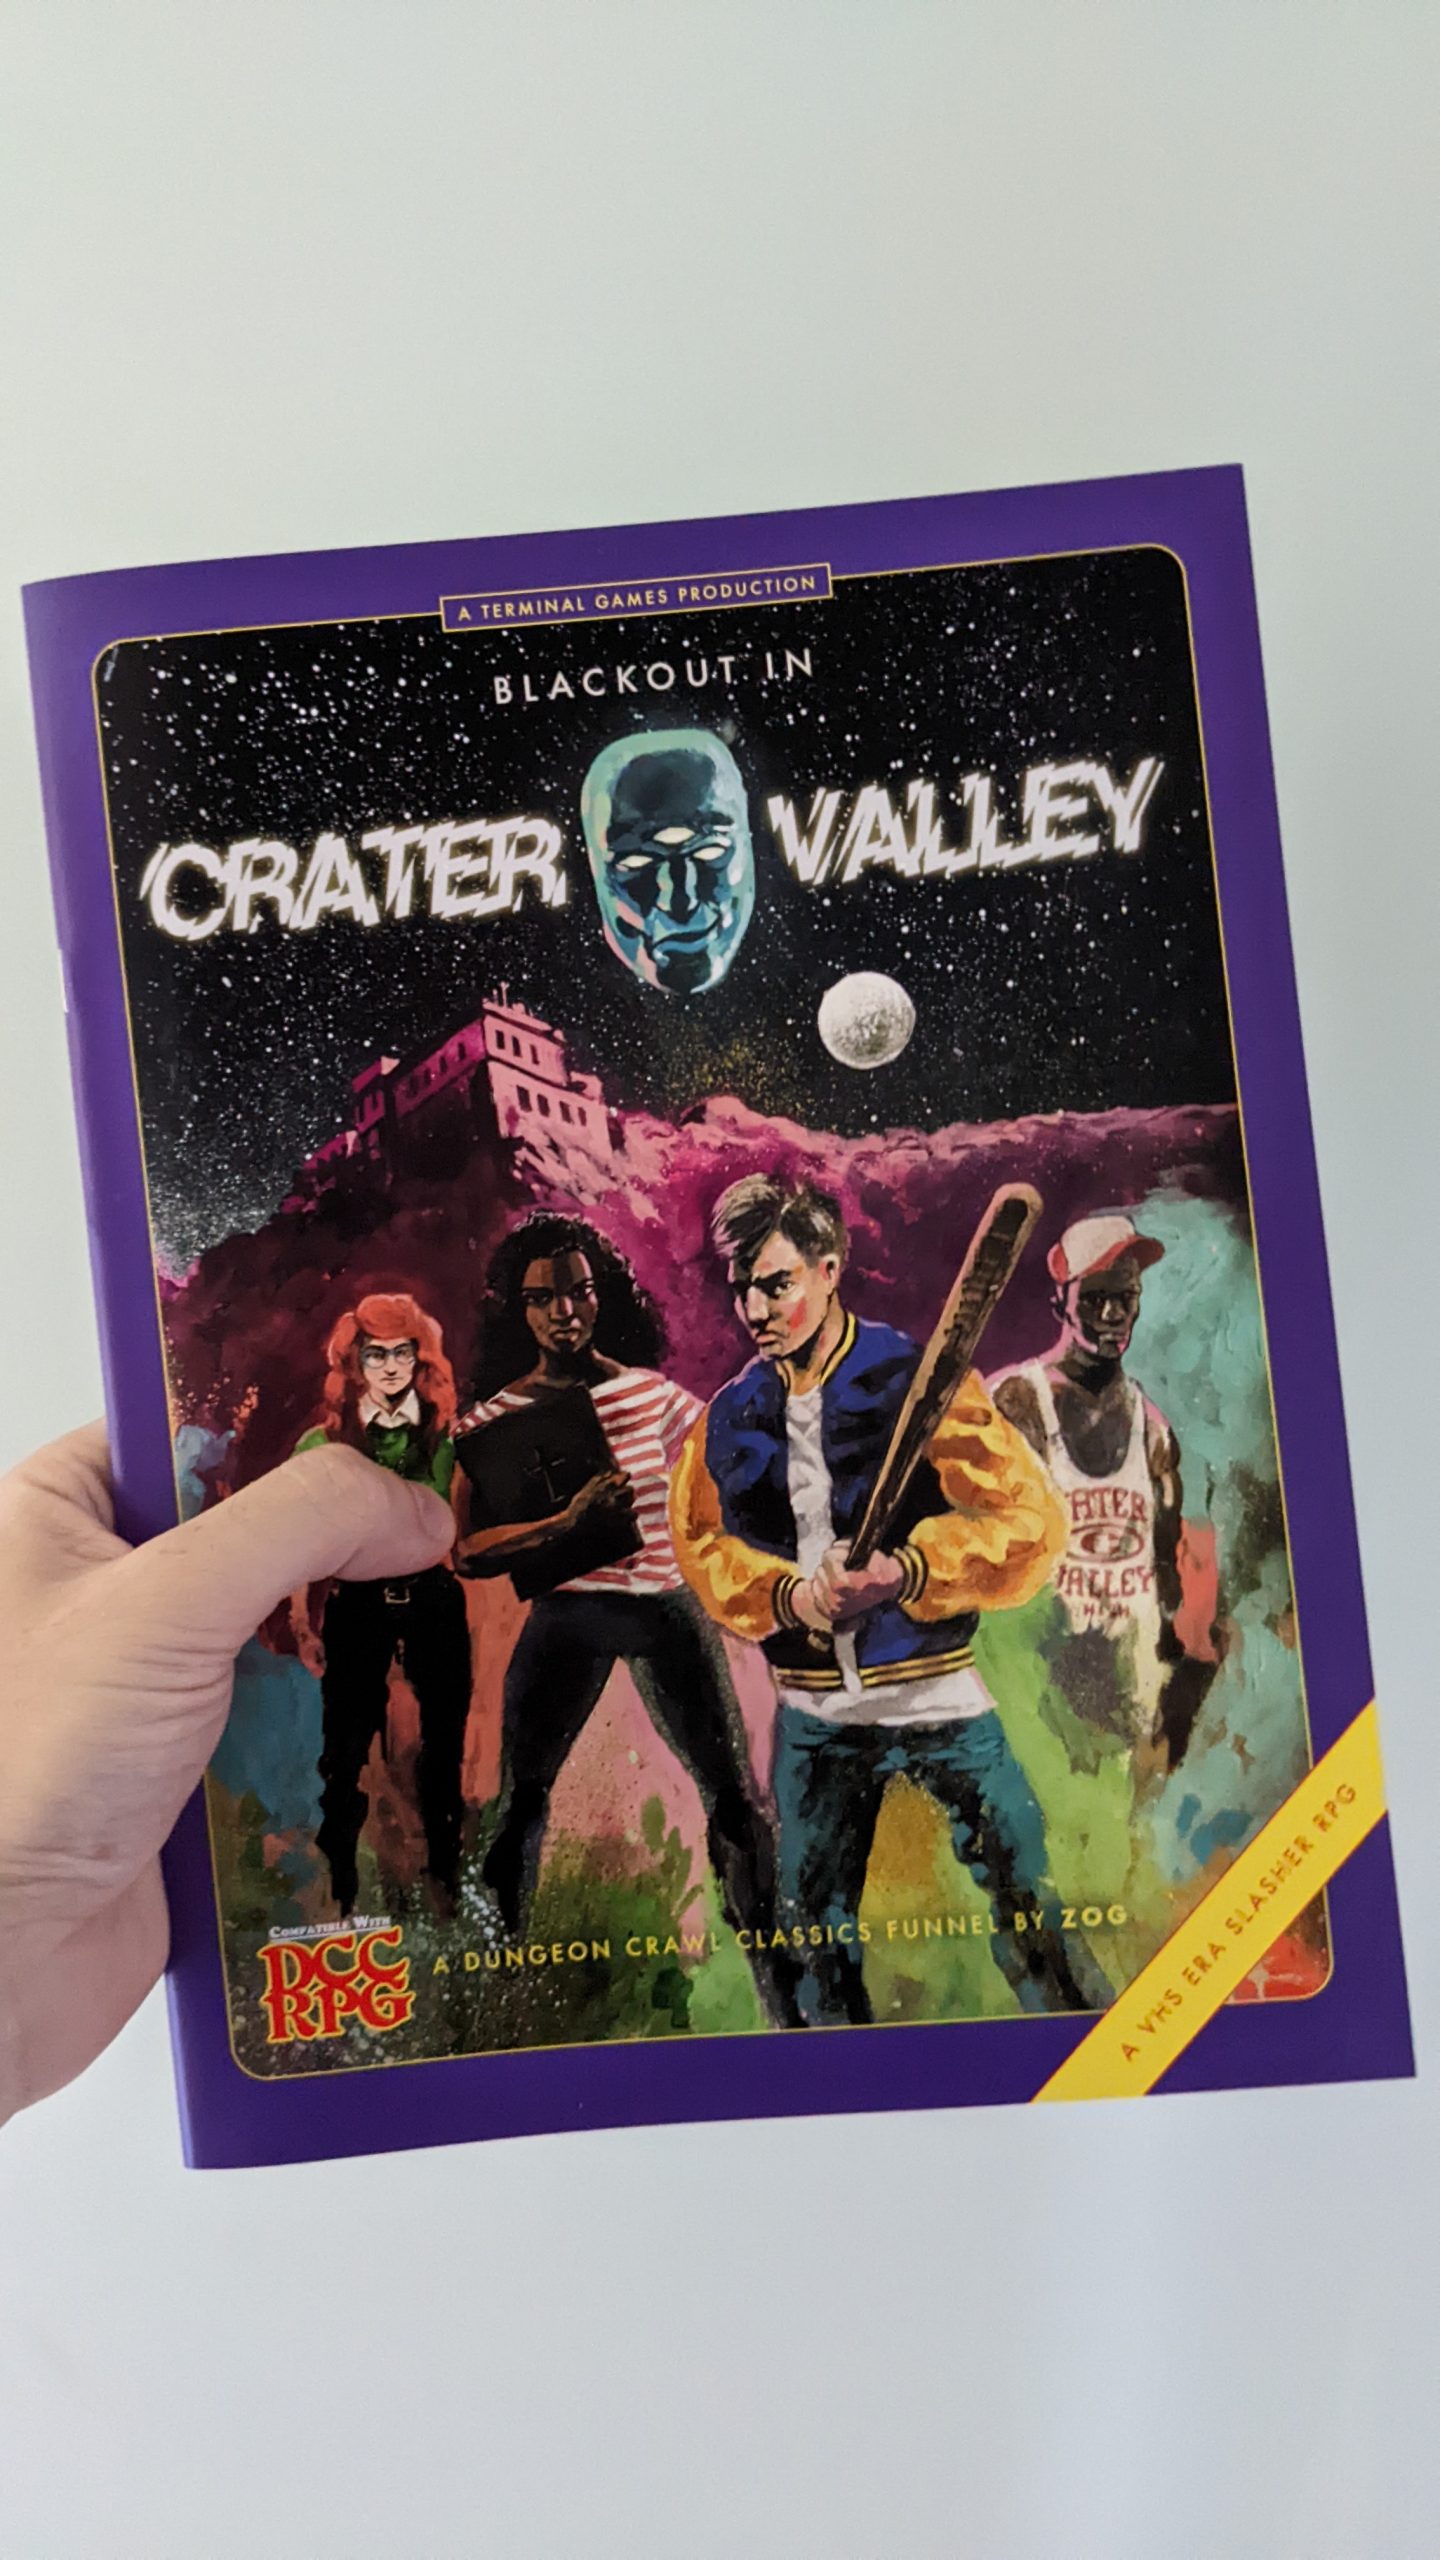 A softcover A4 book. The cover resembles an 80s VHS tape. The title, in digitally distorted font, reads "Blackout In Crater Valley" above an illustration of a group of teenagers armed with baseball bats.